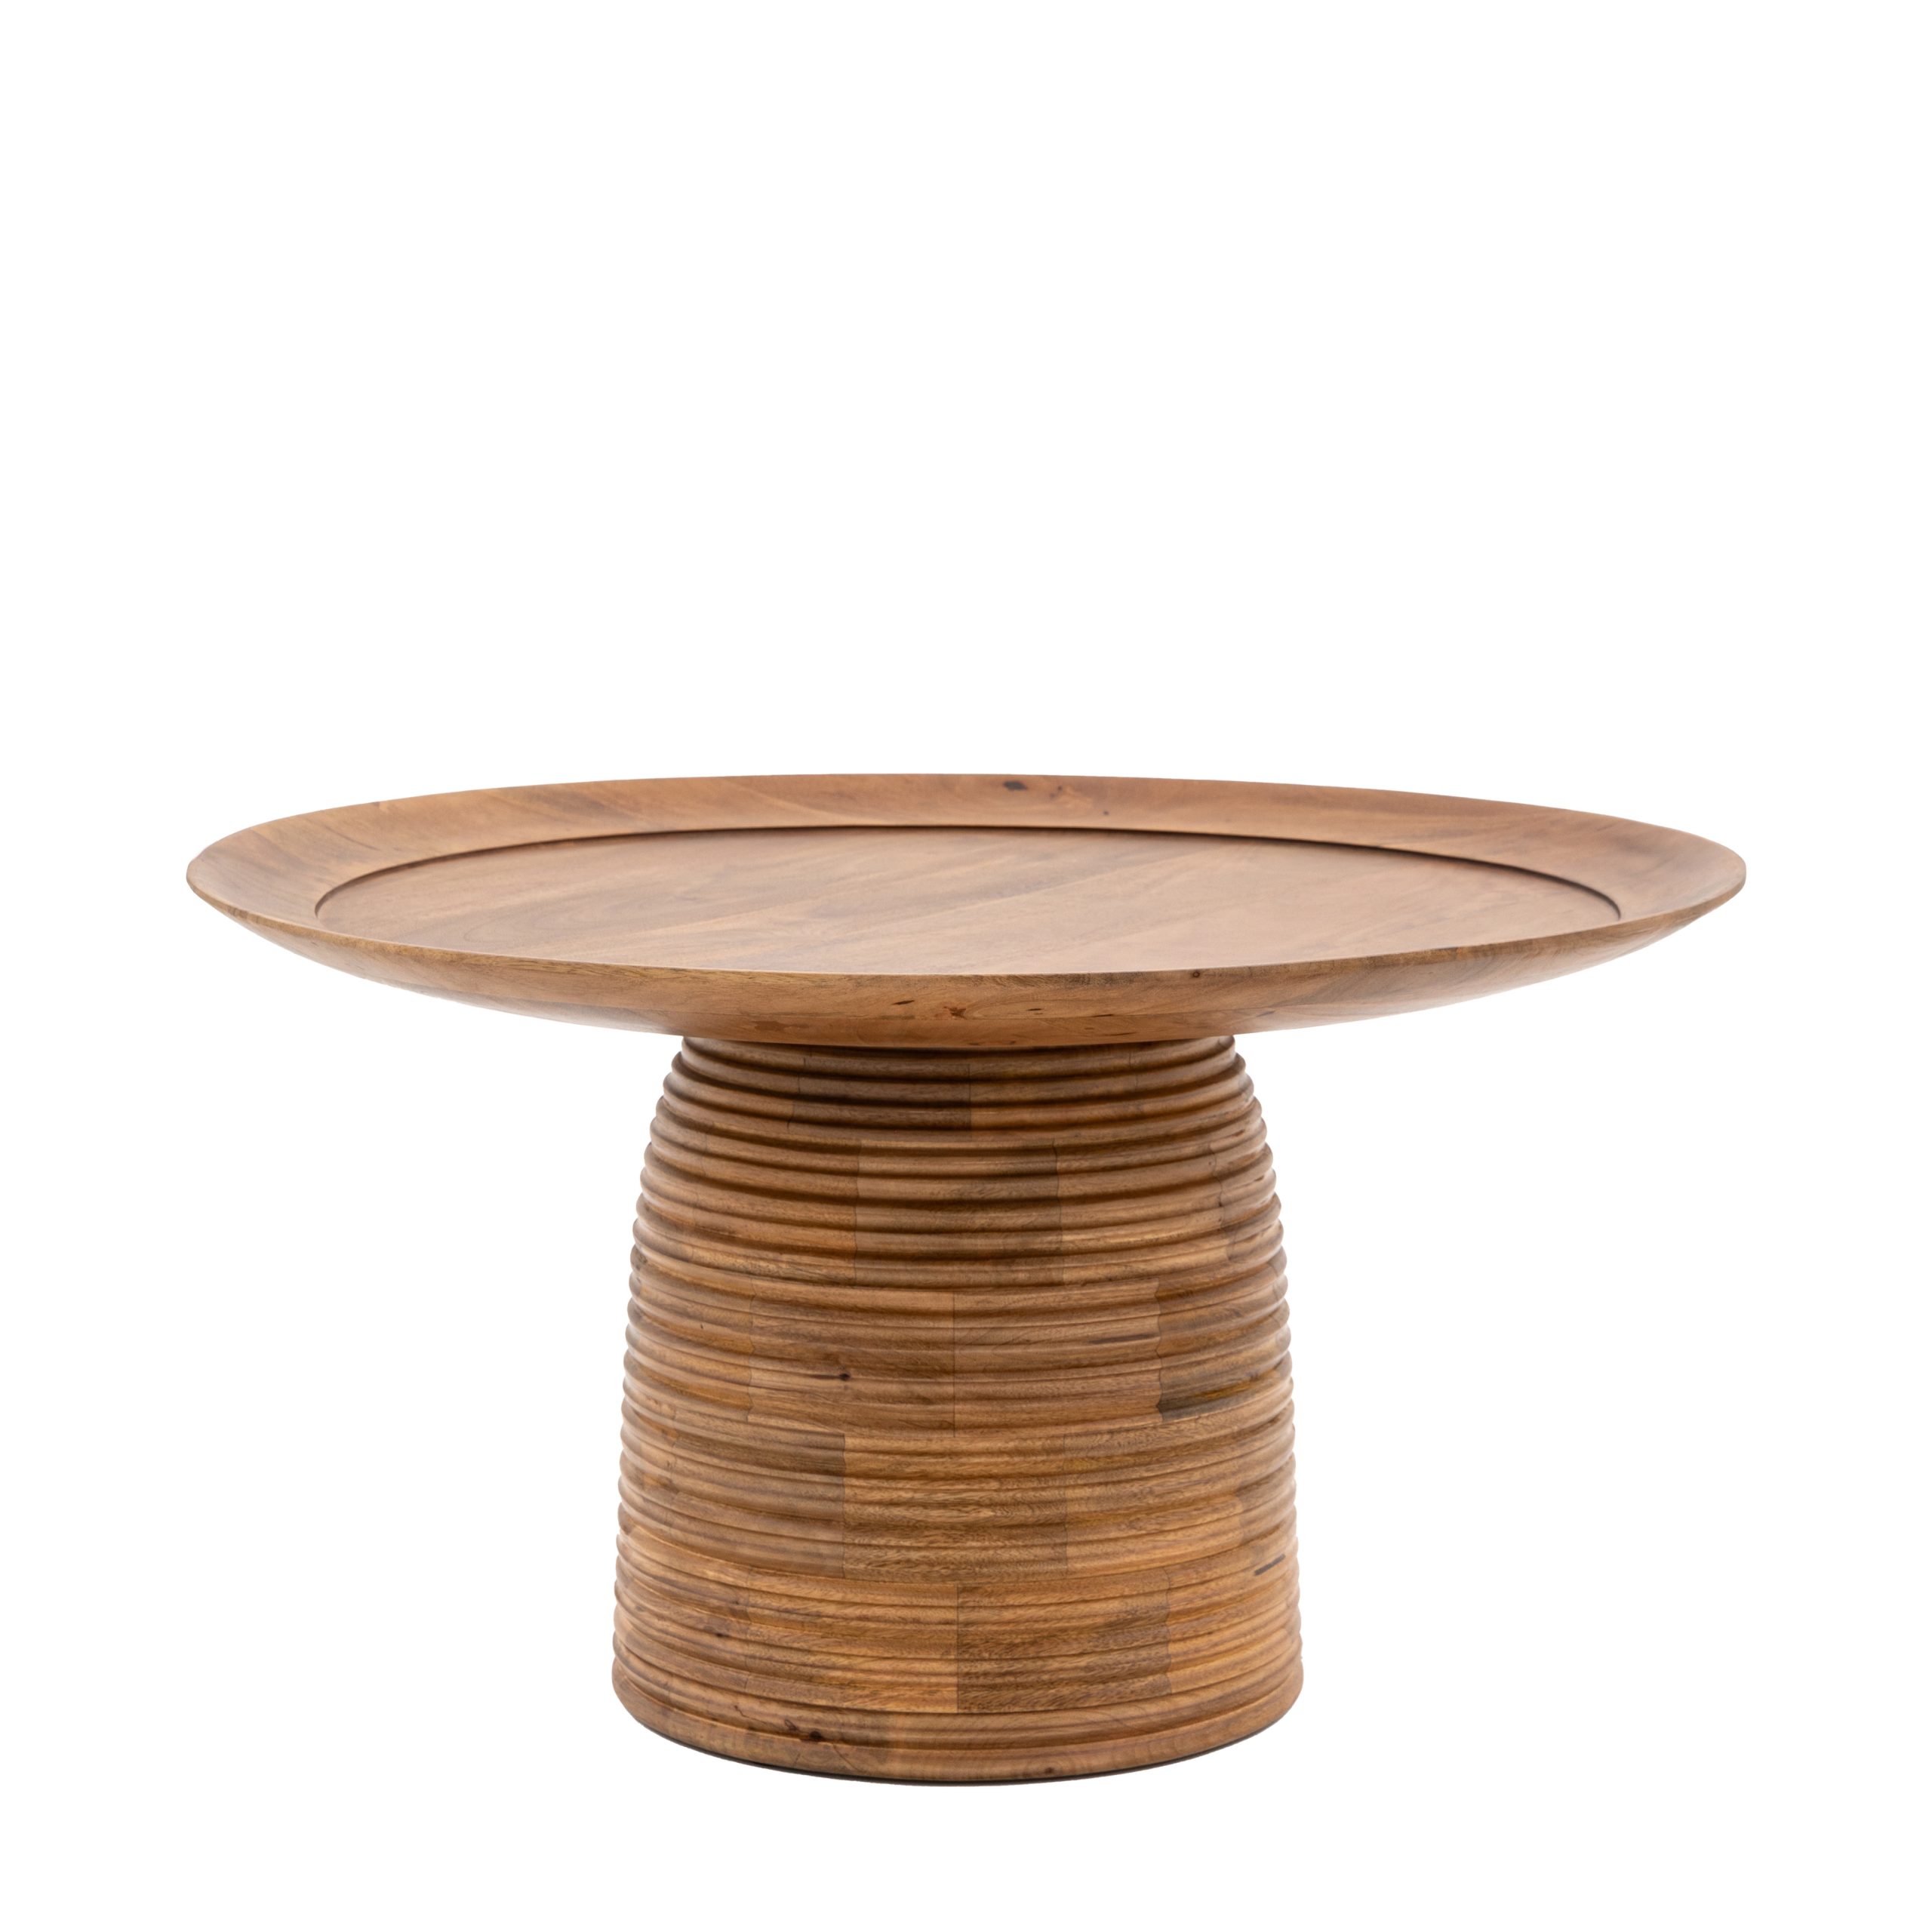 Gallery Direct Belmonte Coffee Table